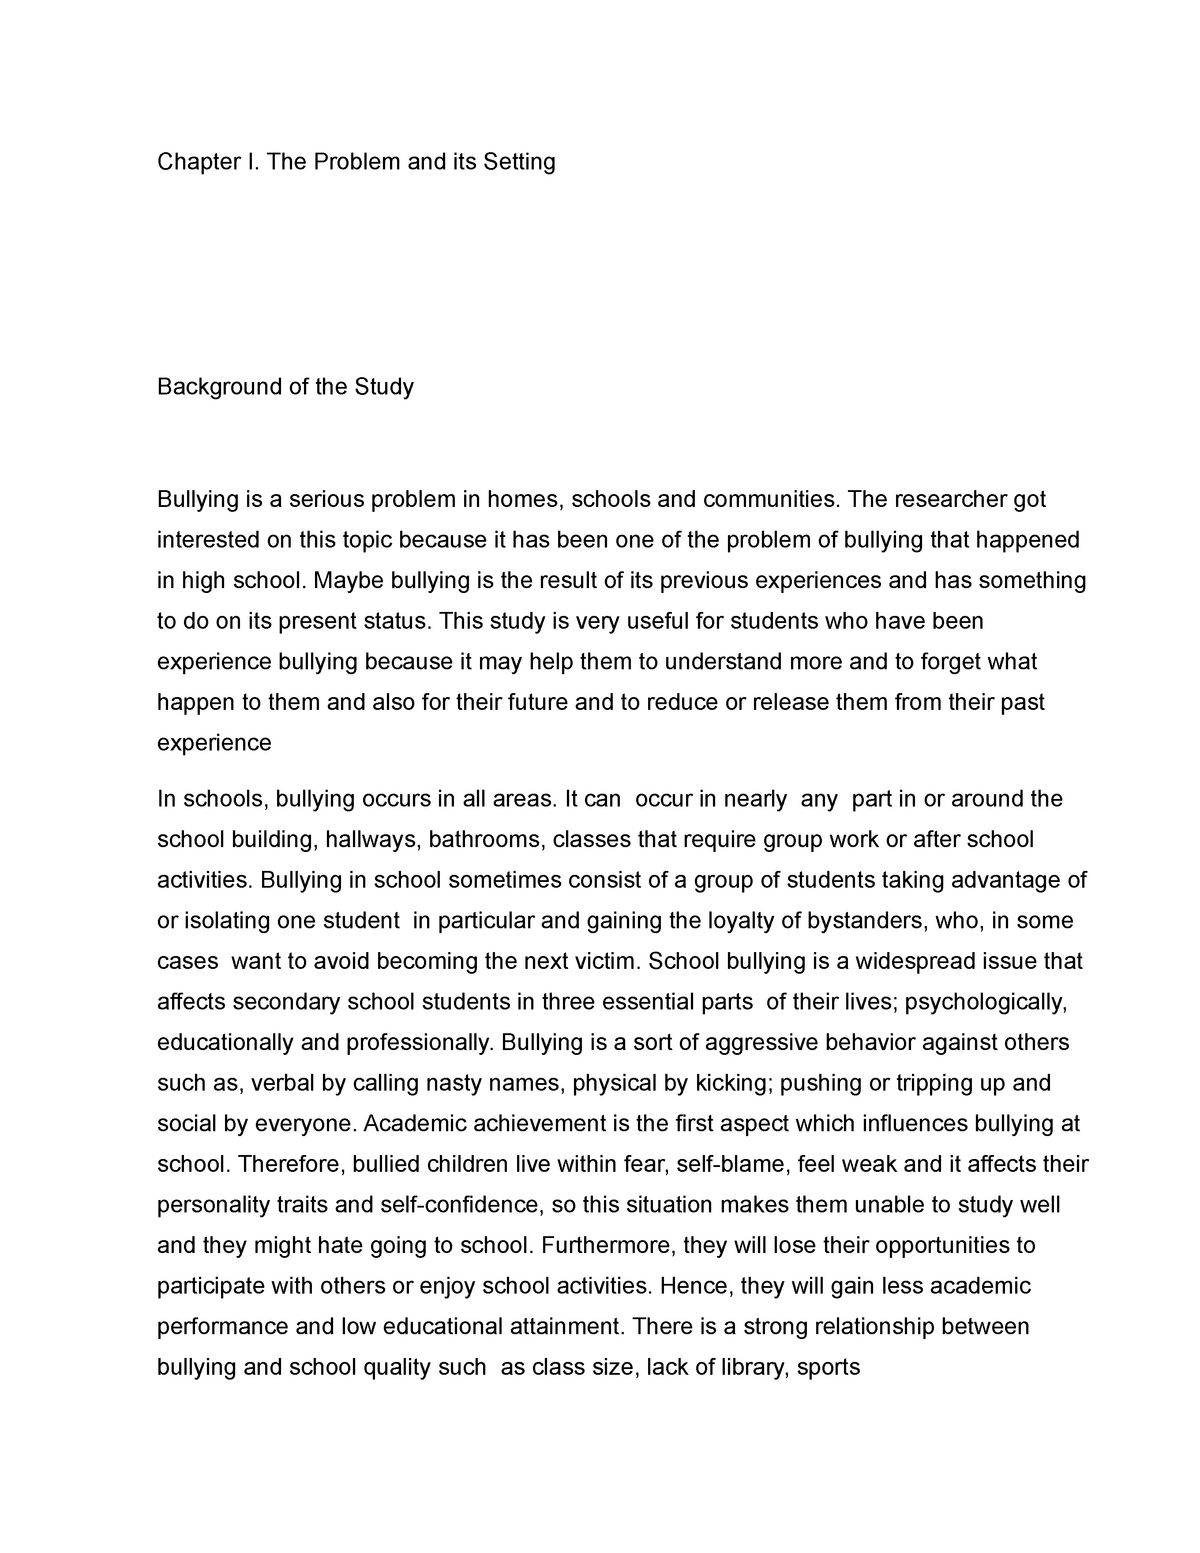 research chapter 1 about bullying